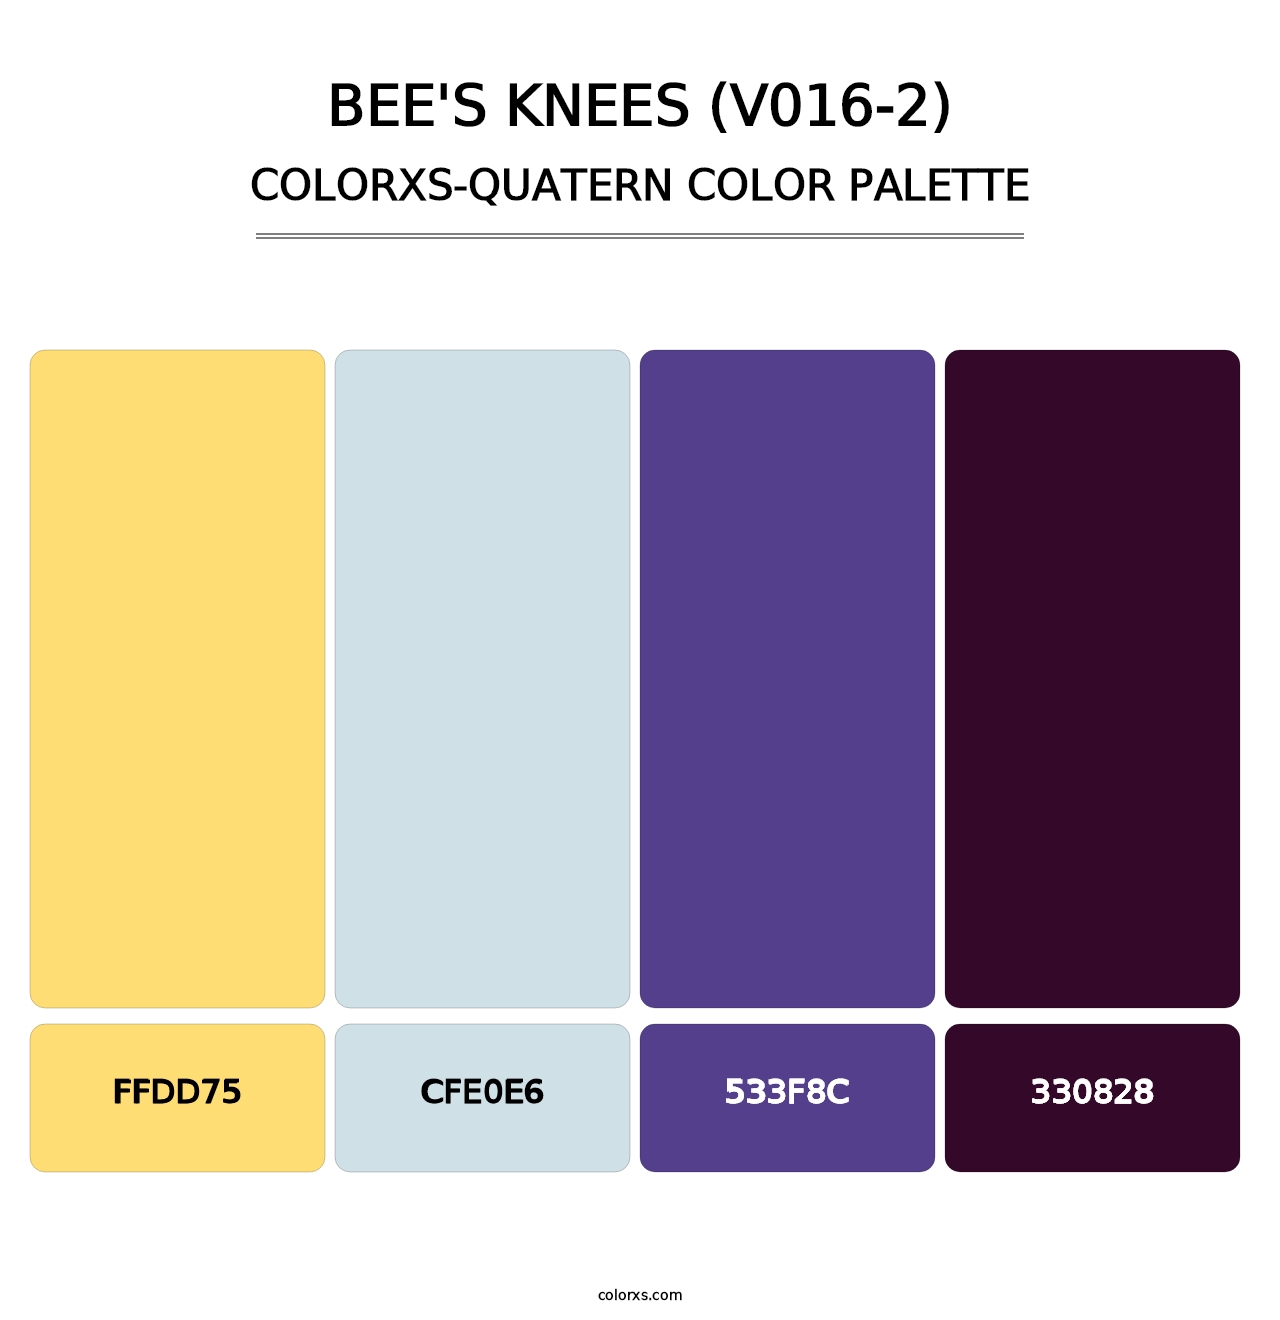 Bee's Knees (V016-2) - Colorxs Quatern Palette